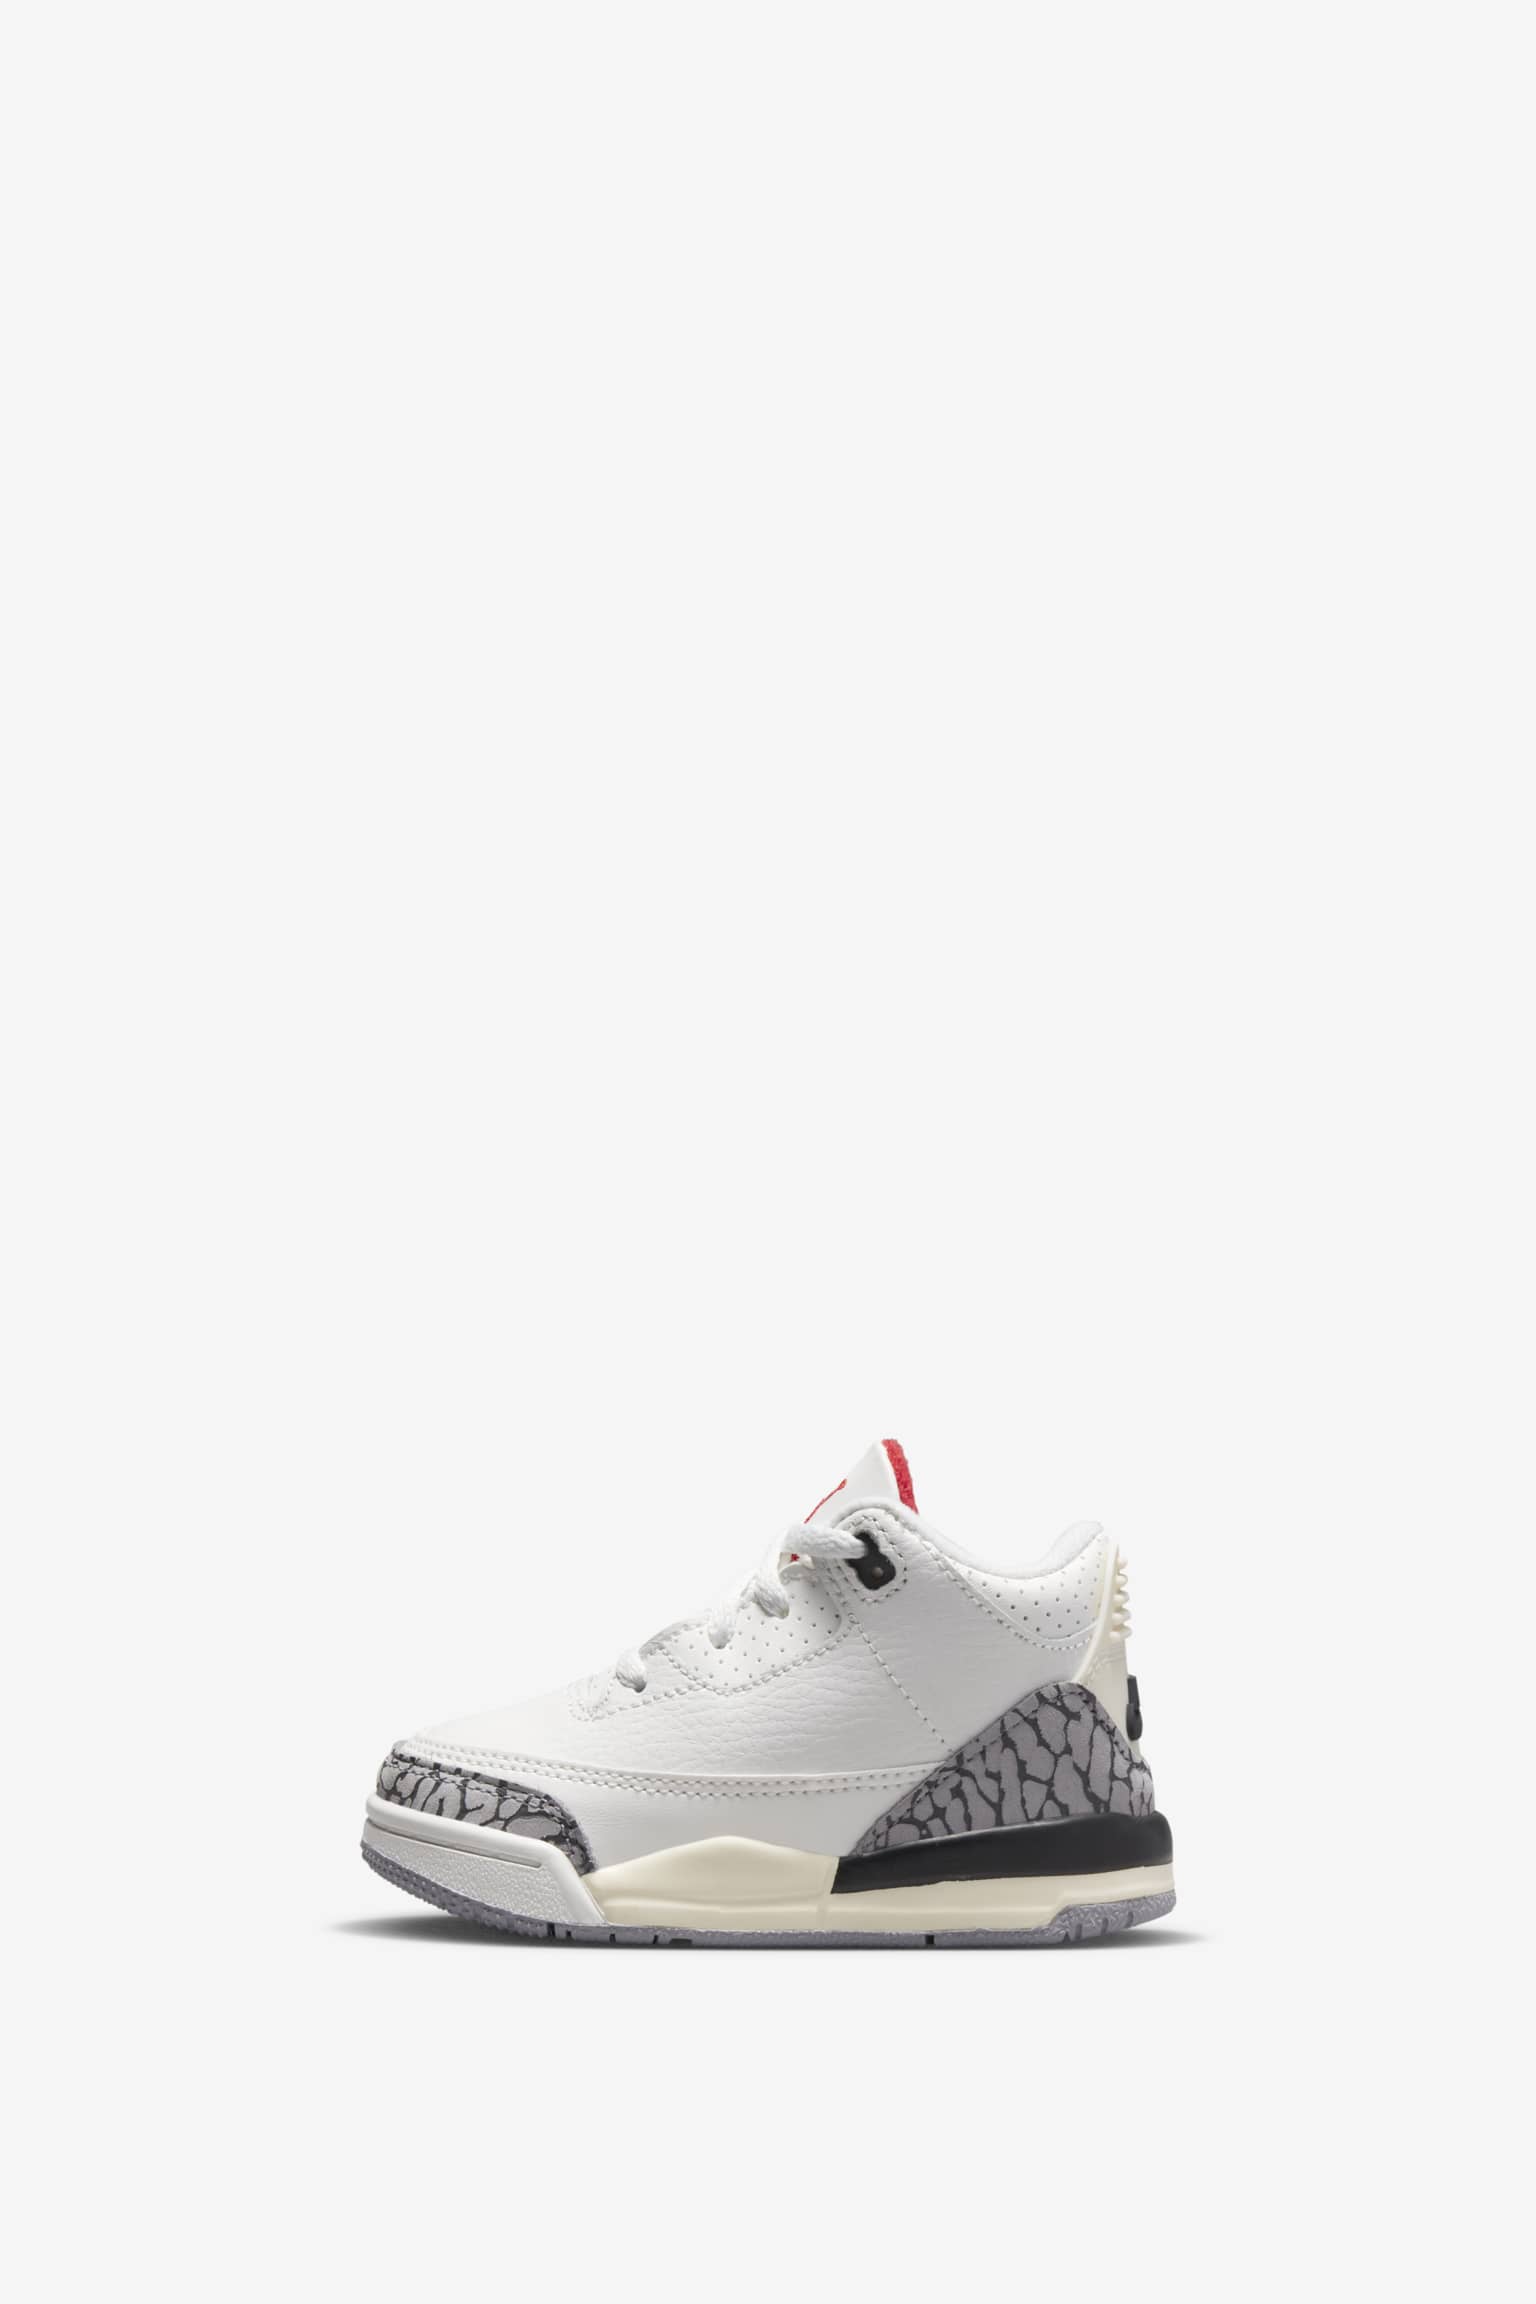 NIKE公式】エア ジョーダン 3 'White Cement Reimagined' (DN3707-100 ...